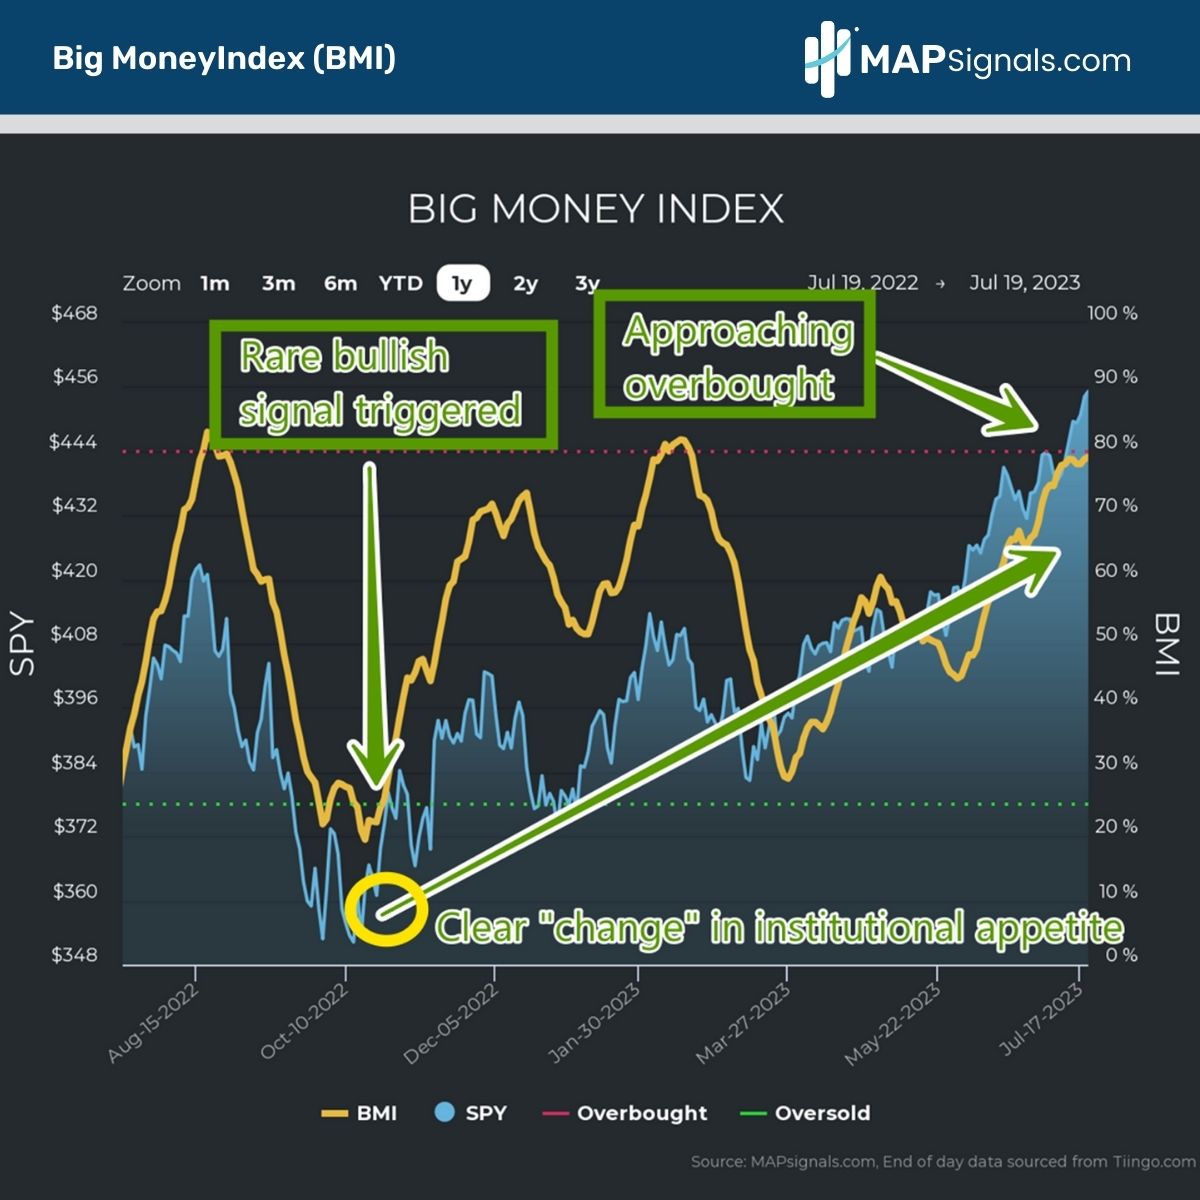 Big Money Index (BMI) approaches Overbought Q3 2023 | MAPsignals